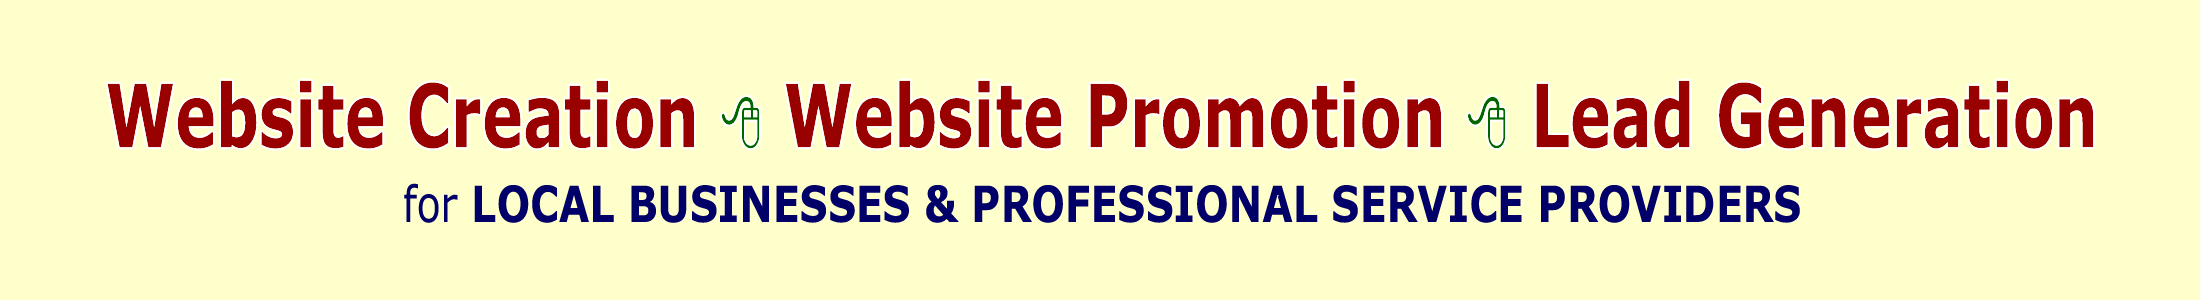 Website Creation, Website Promotion And Lead Generation By iBeFound International Ltd